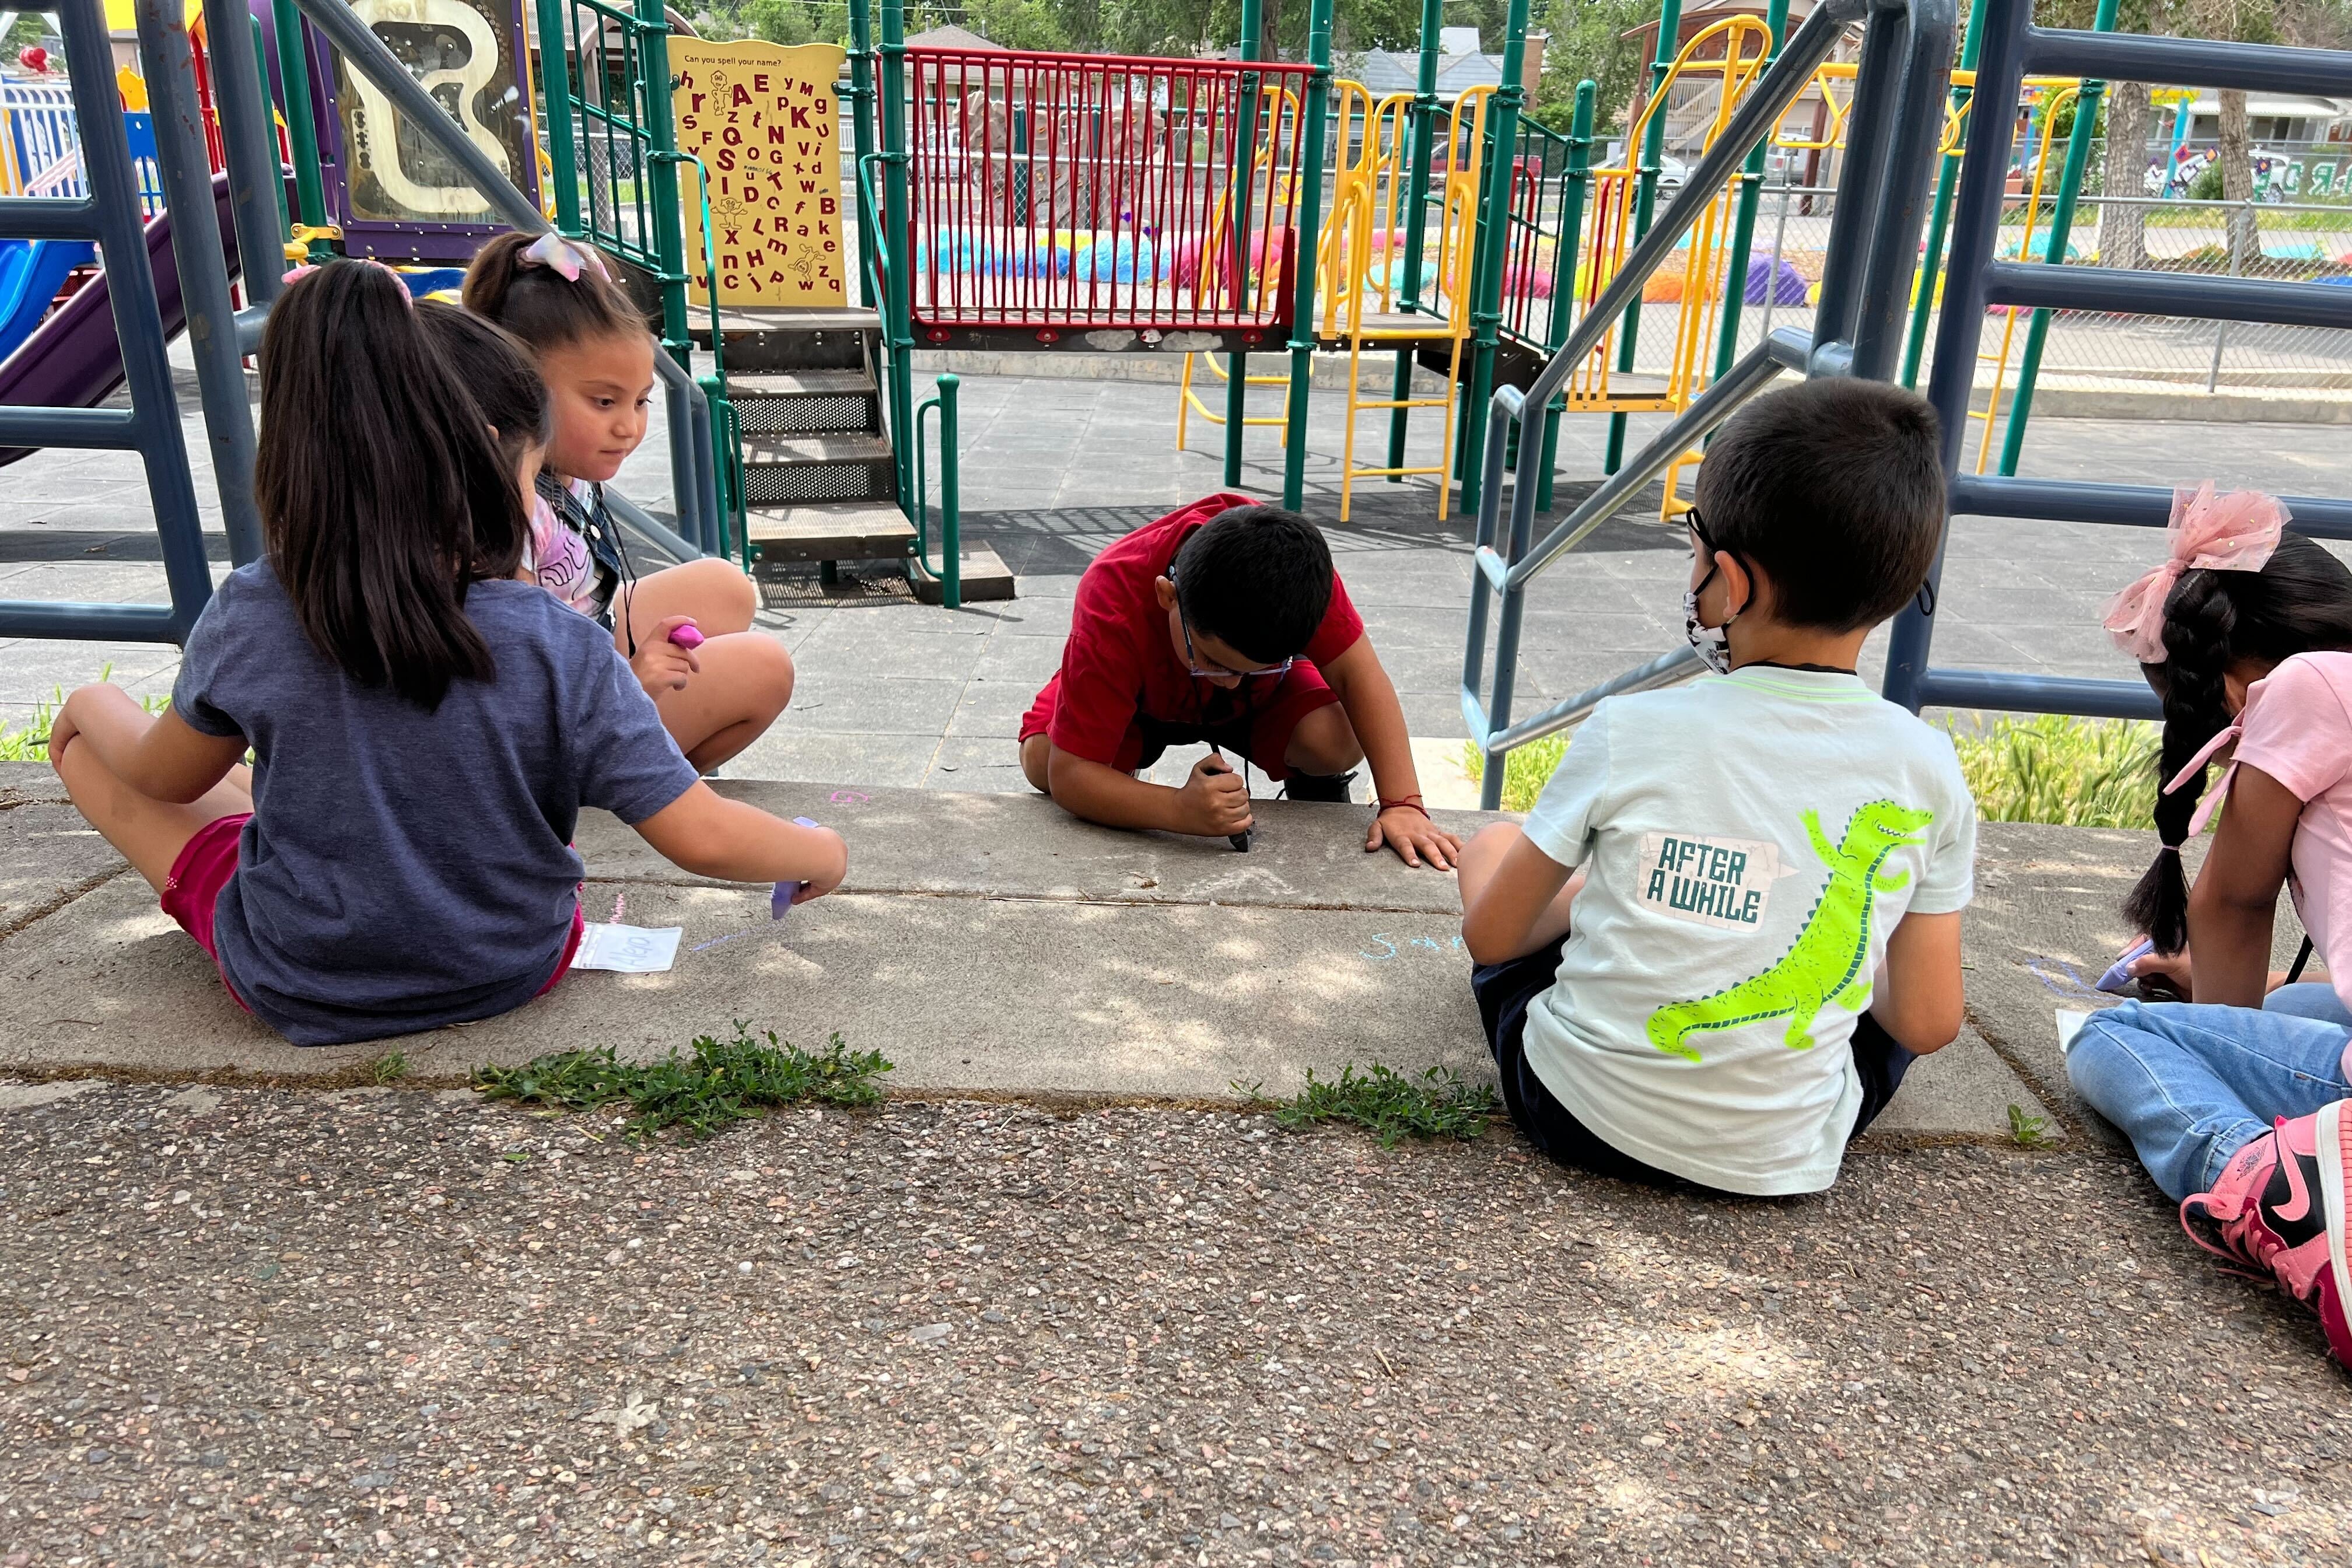 Five young children write with chalk on the sidewalk in front of a school playground.